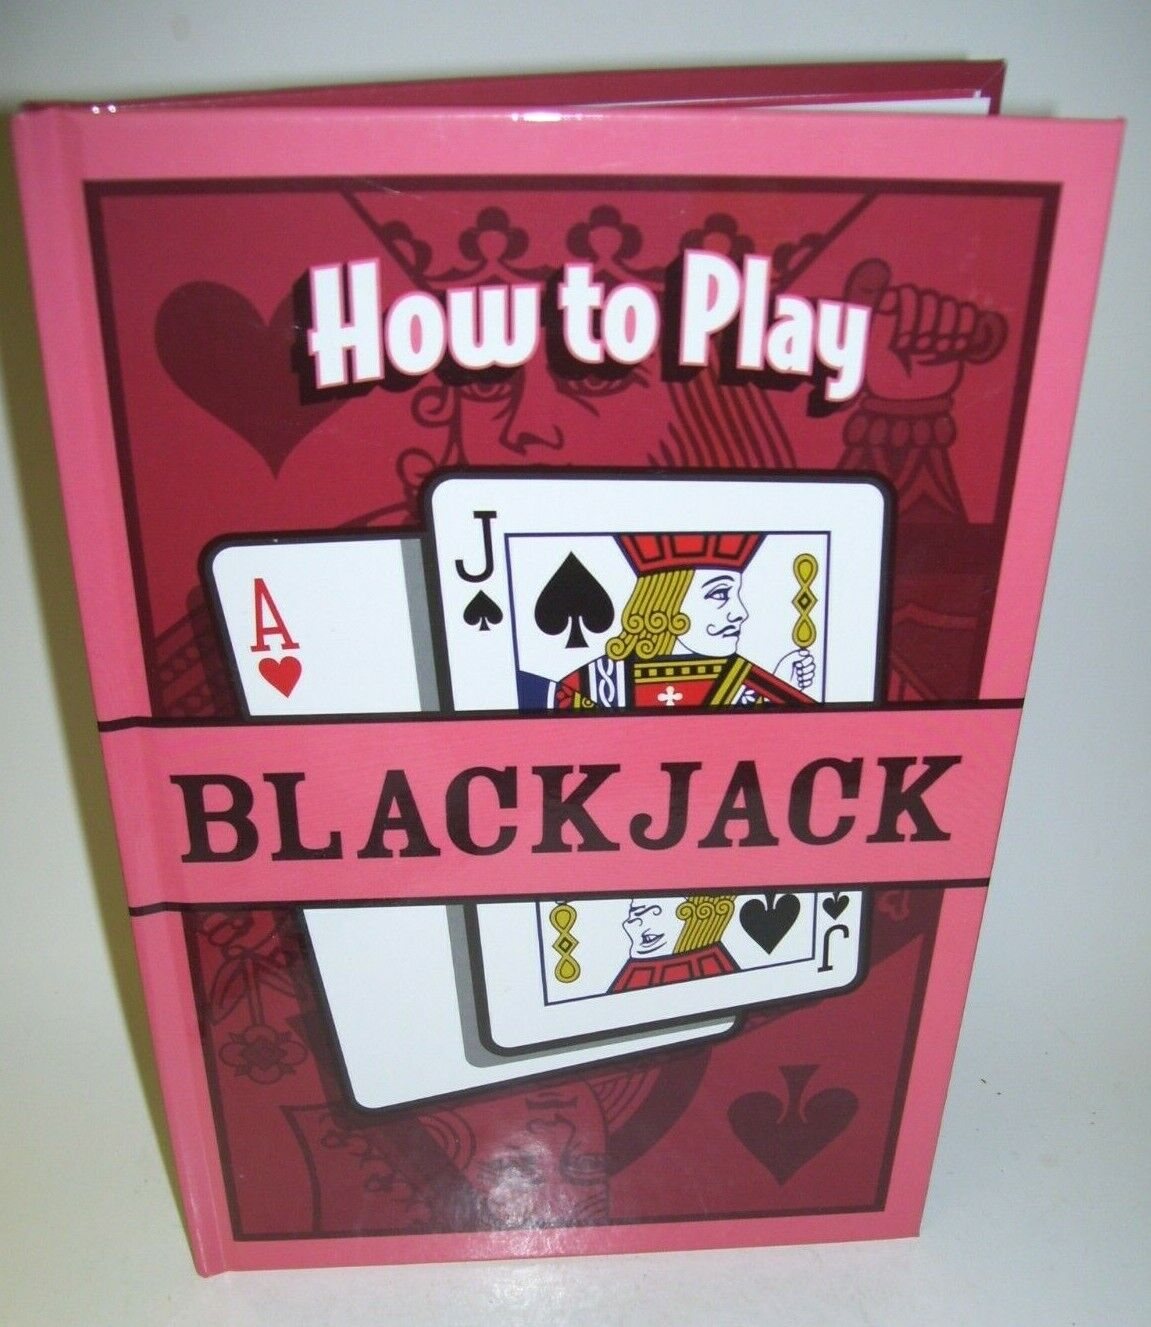 How to Play Black Jack by Wesley R. Young